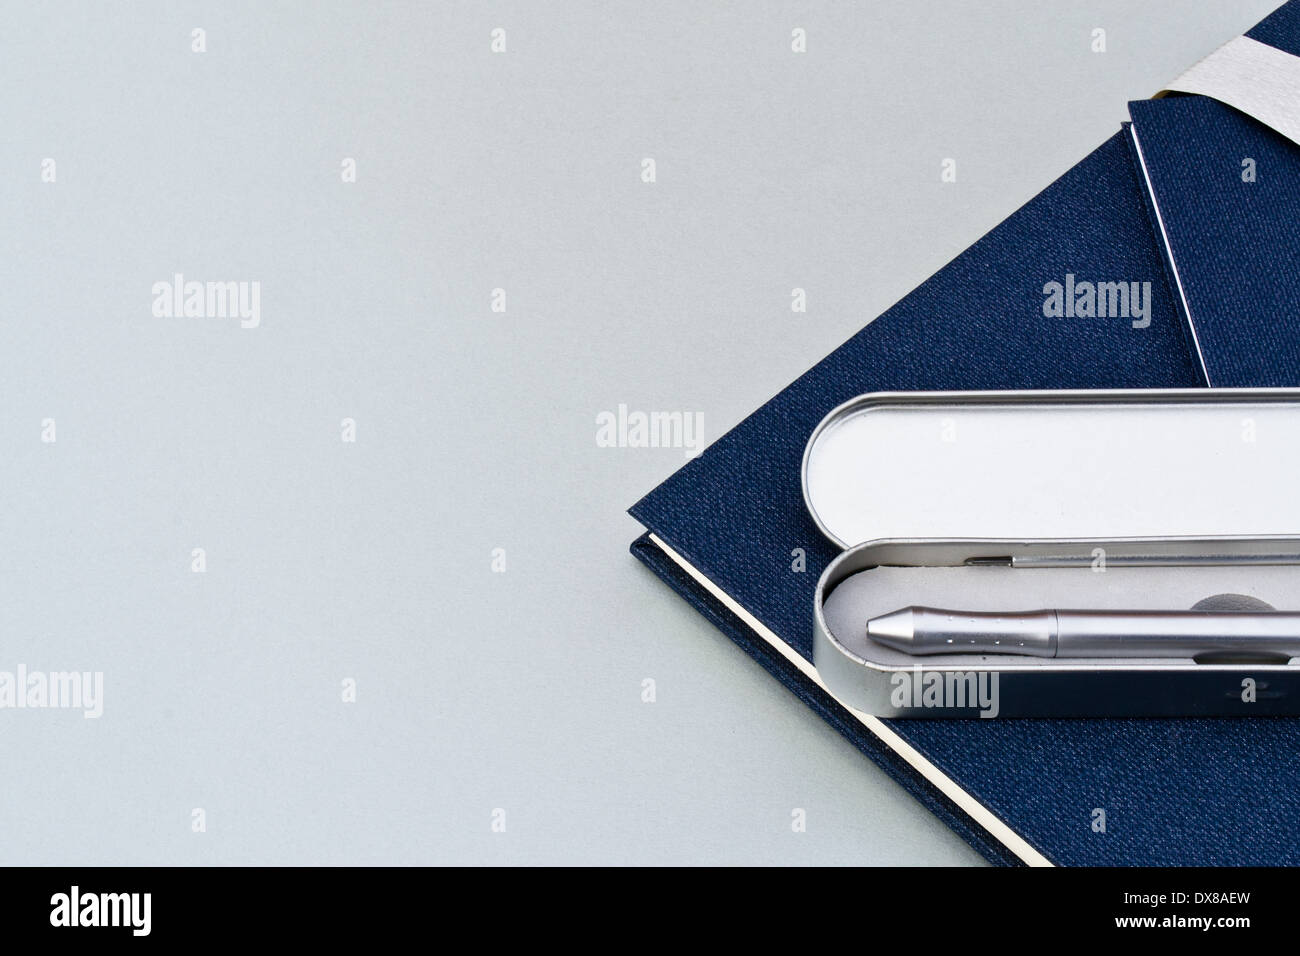 Diary and pen used in an office or business environment. The diary or book is blue and the silver pen is in it's silver case. Stock Photo